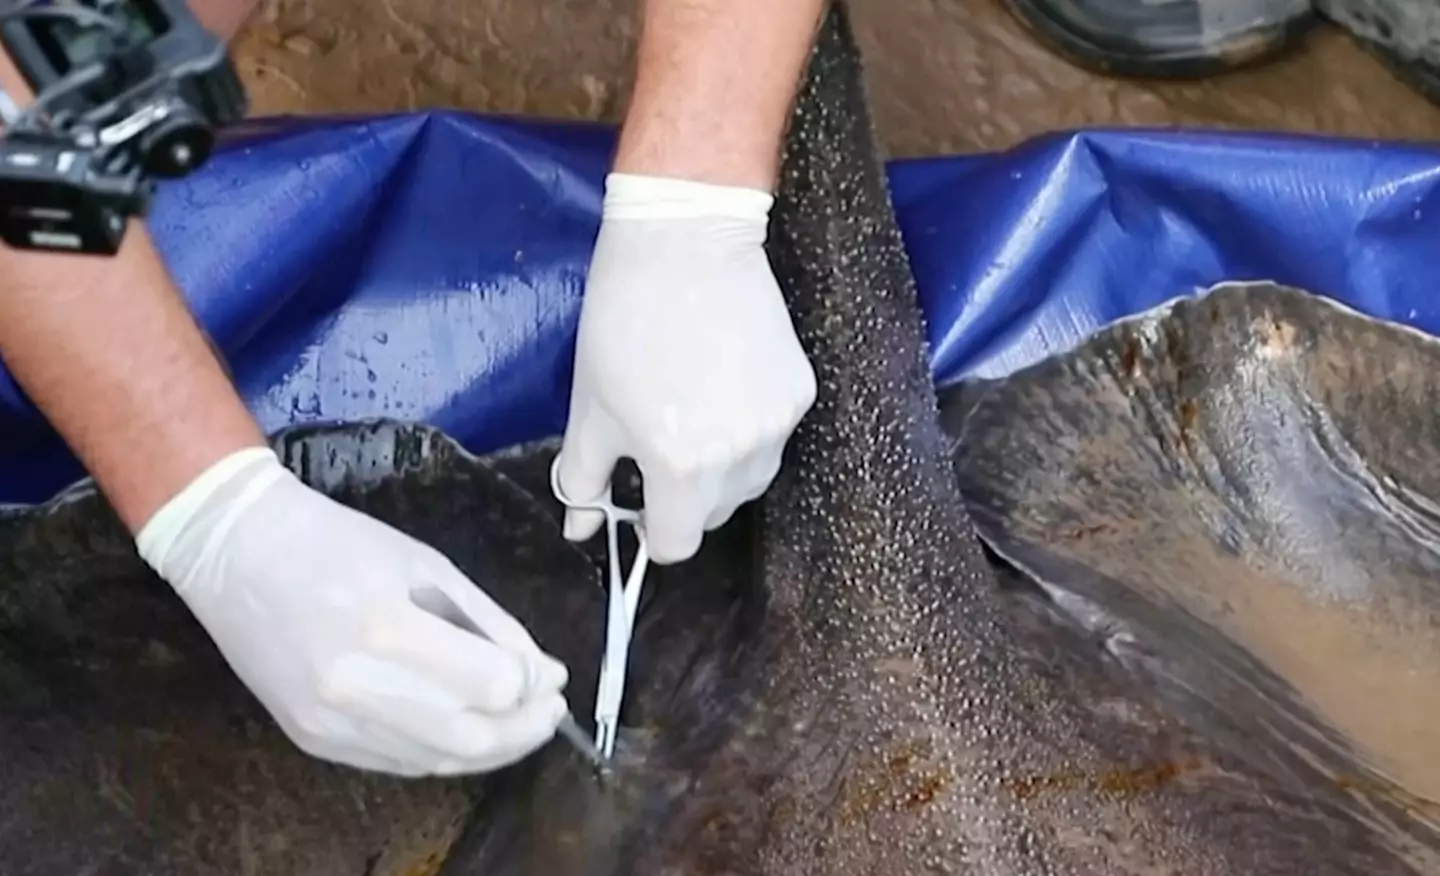 The stingray was released back into the river after it was tagged.